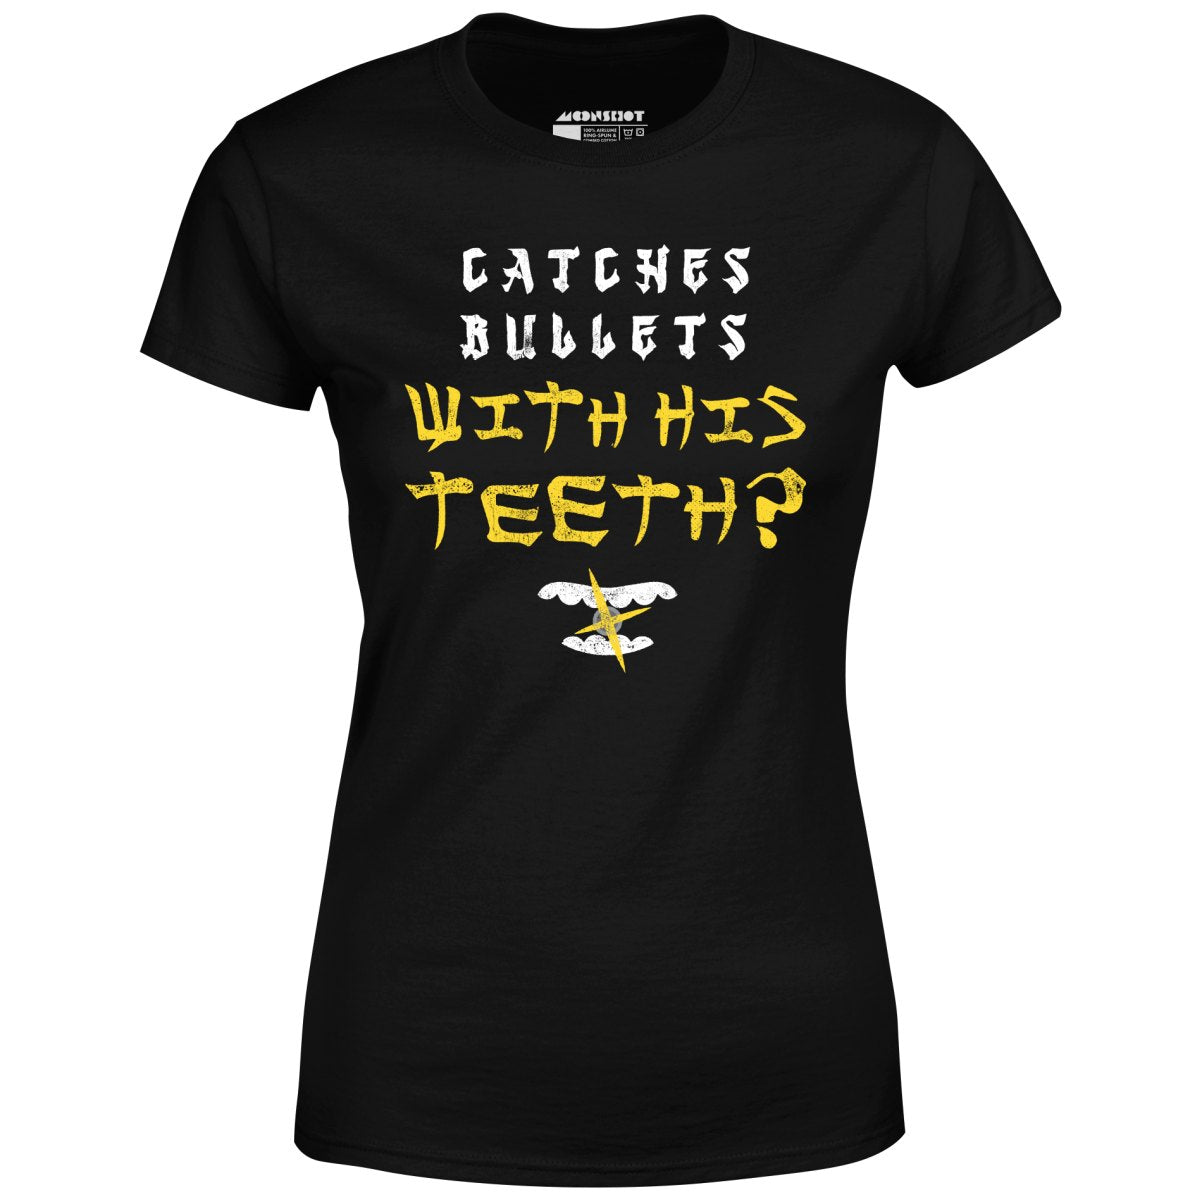 Last Dragon - Catches Bullets With His Teeth? - Women's T-Shirt